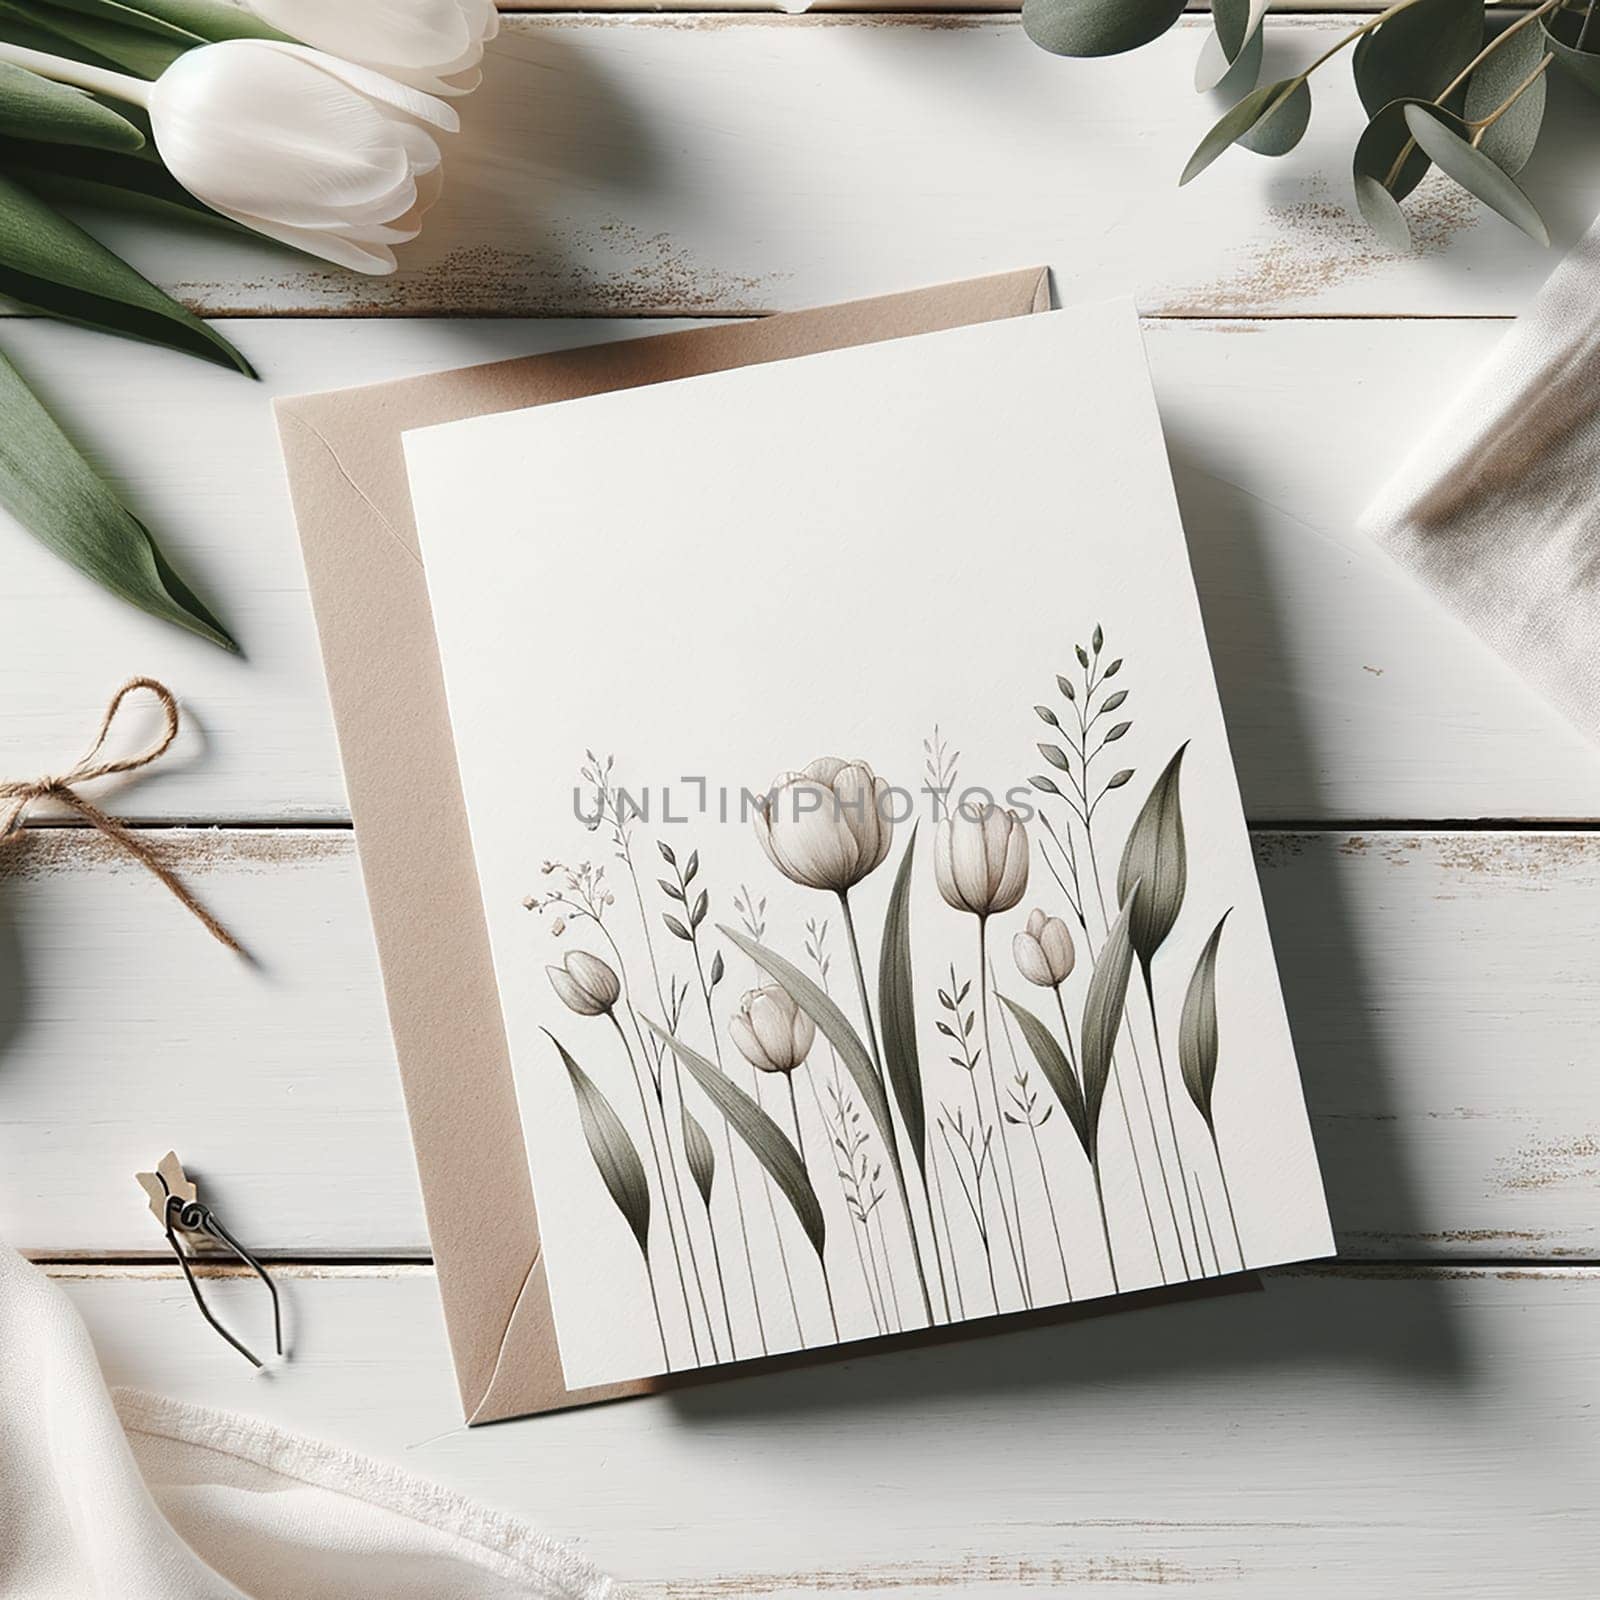 Anniversary Romance: Greeting Card Surrounded by Peonies by Petrichor